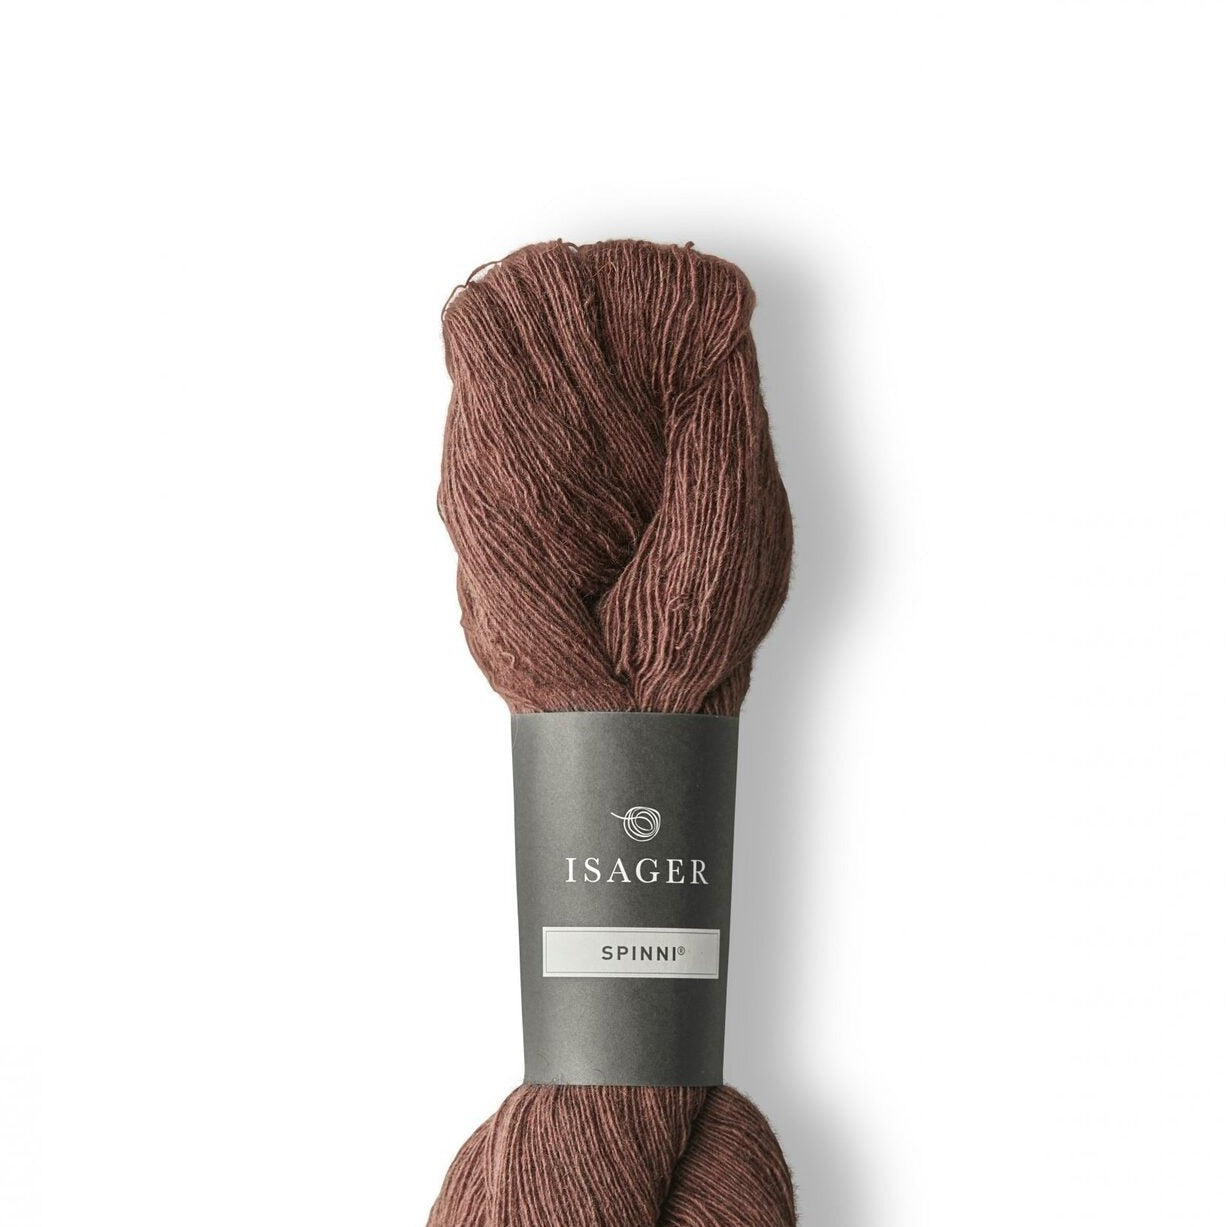 Isager Spinni - 52s - 2 Ply - Isager - The Little Yarn Store